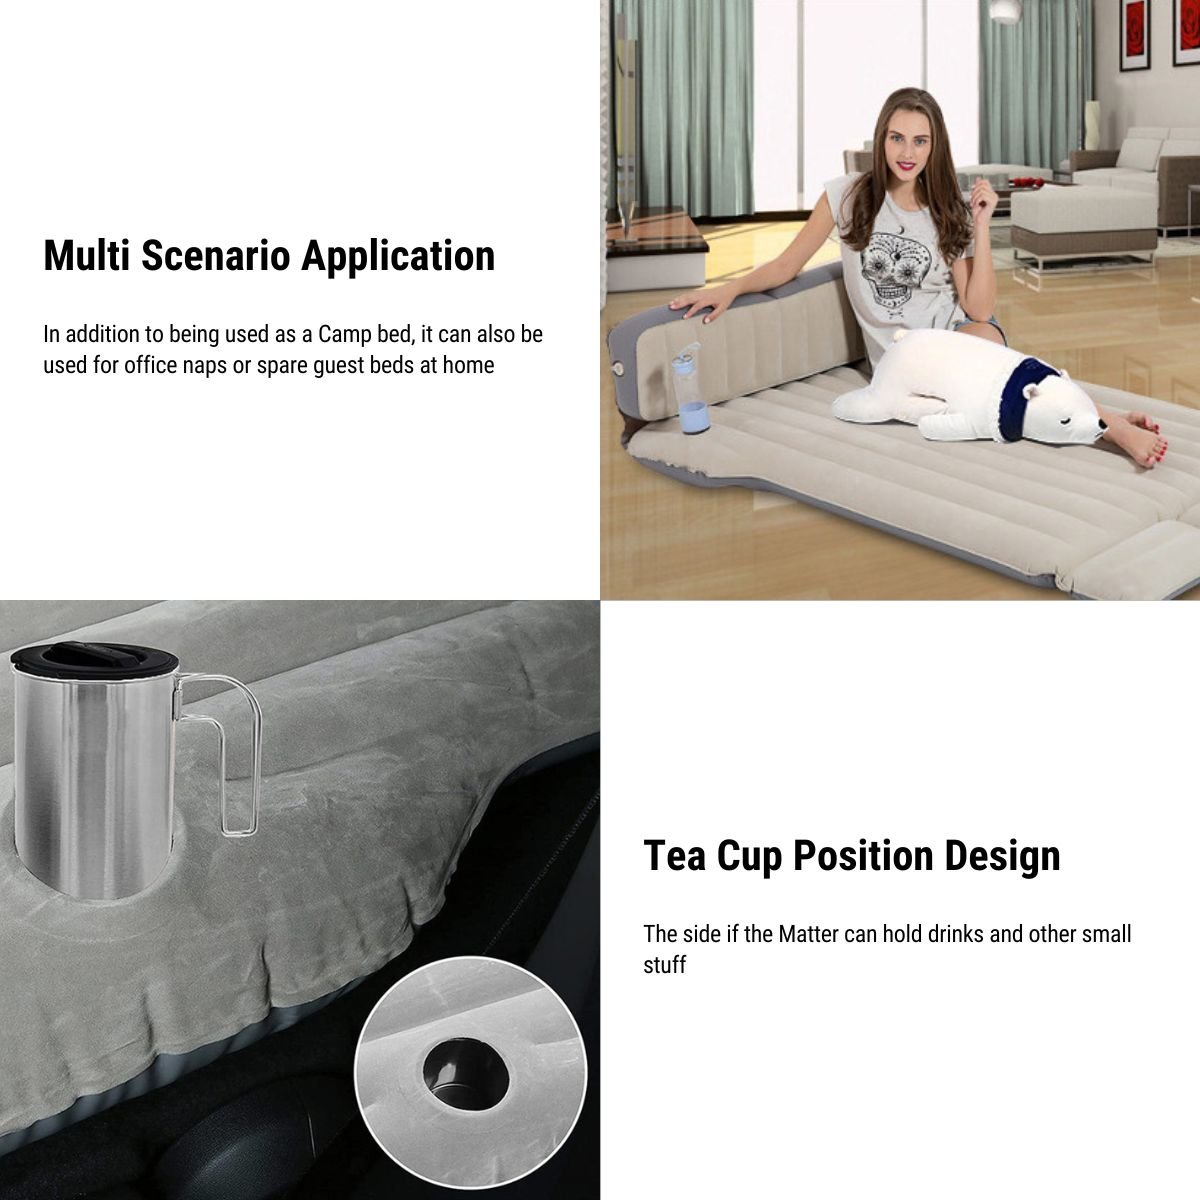 Camping Mattress Air Mattress Bed Inflatable Bed for Tesla - Tesery Official Store